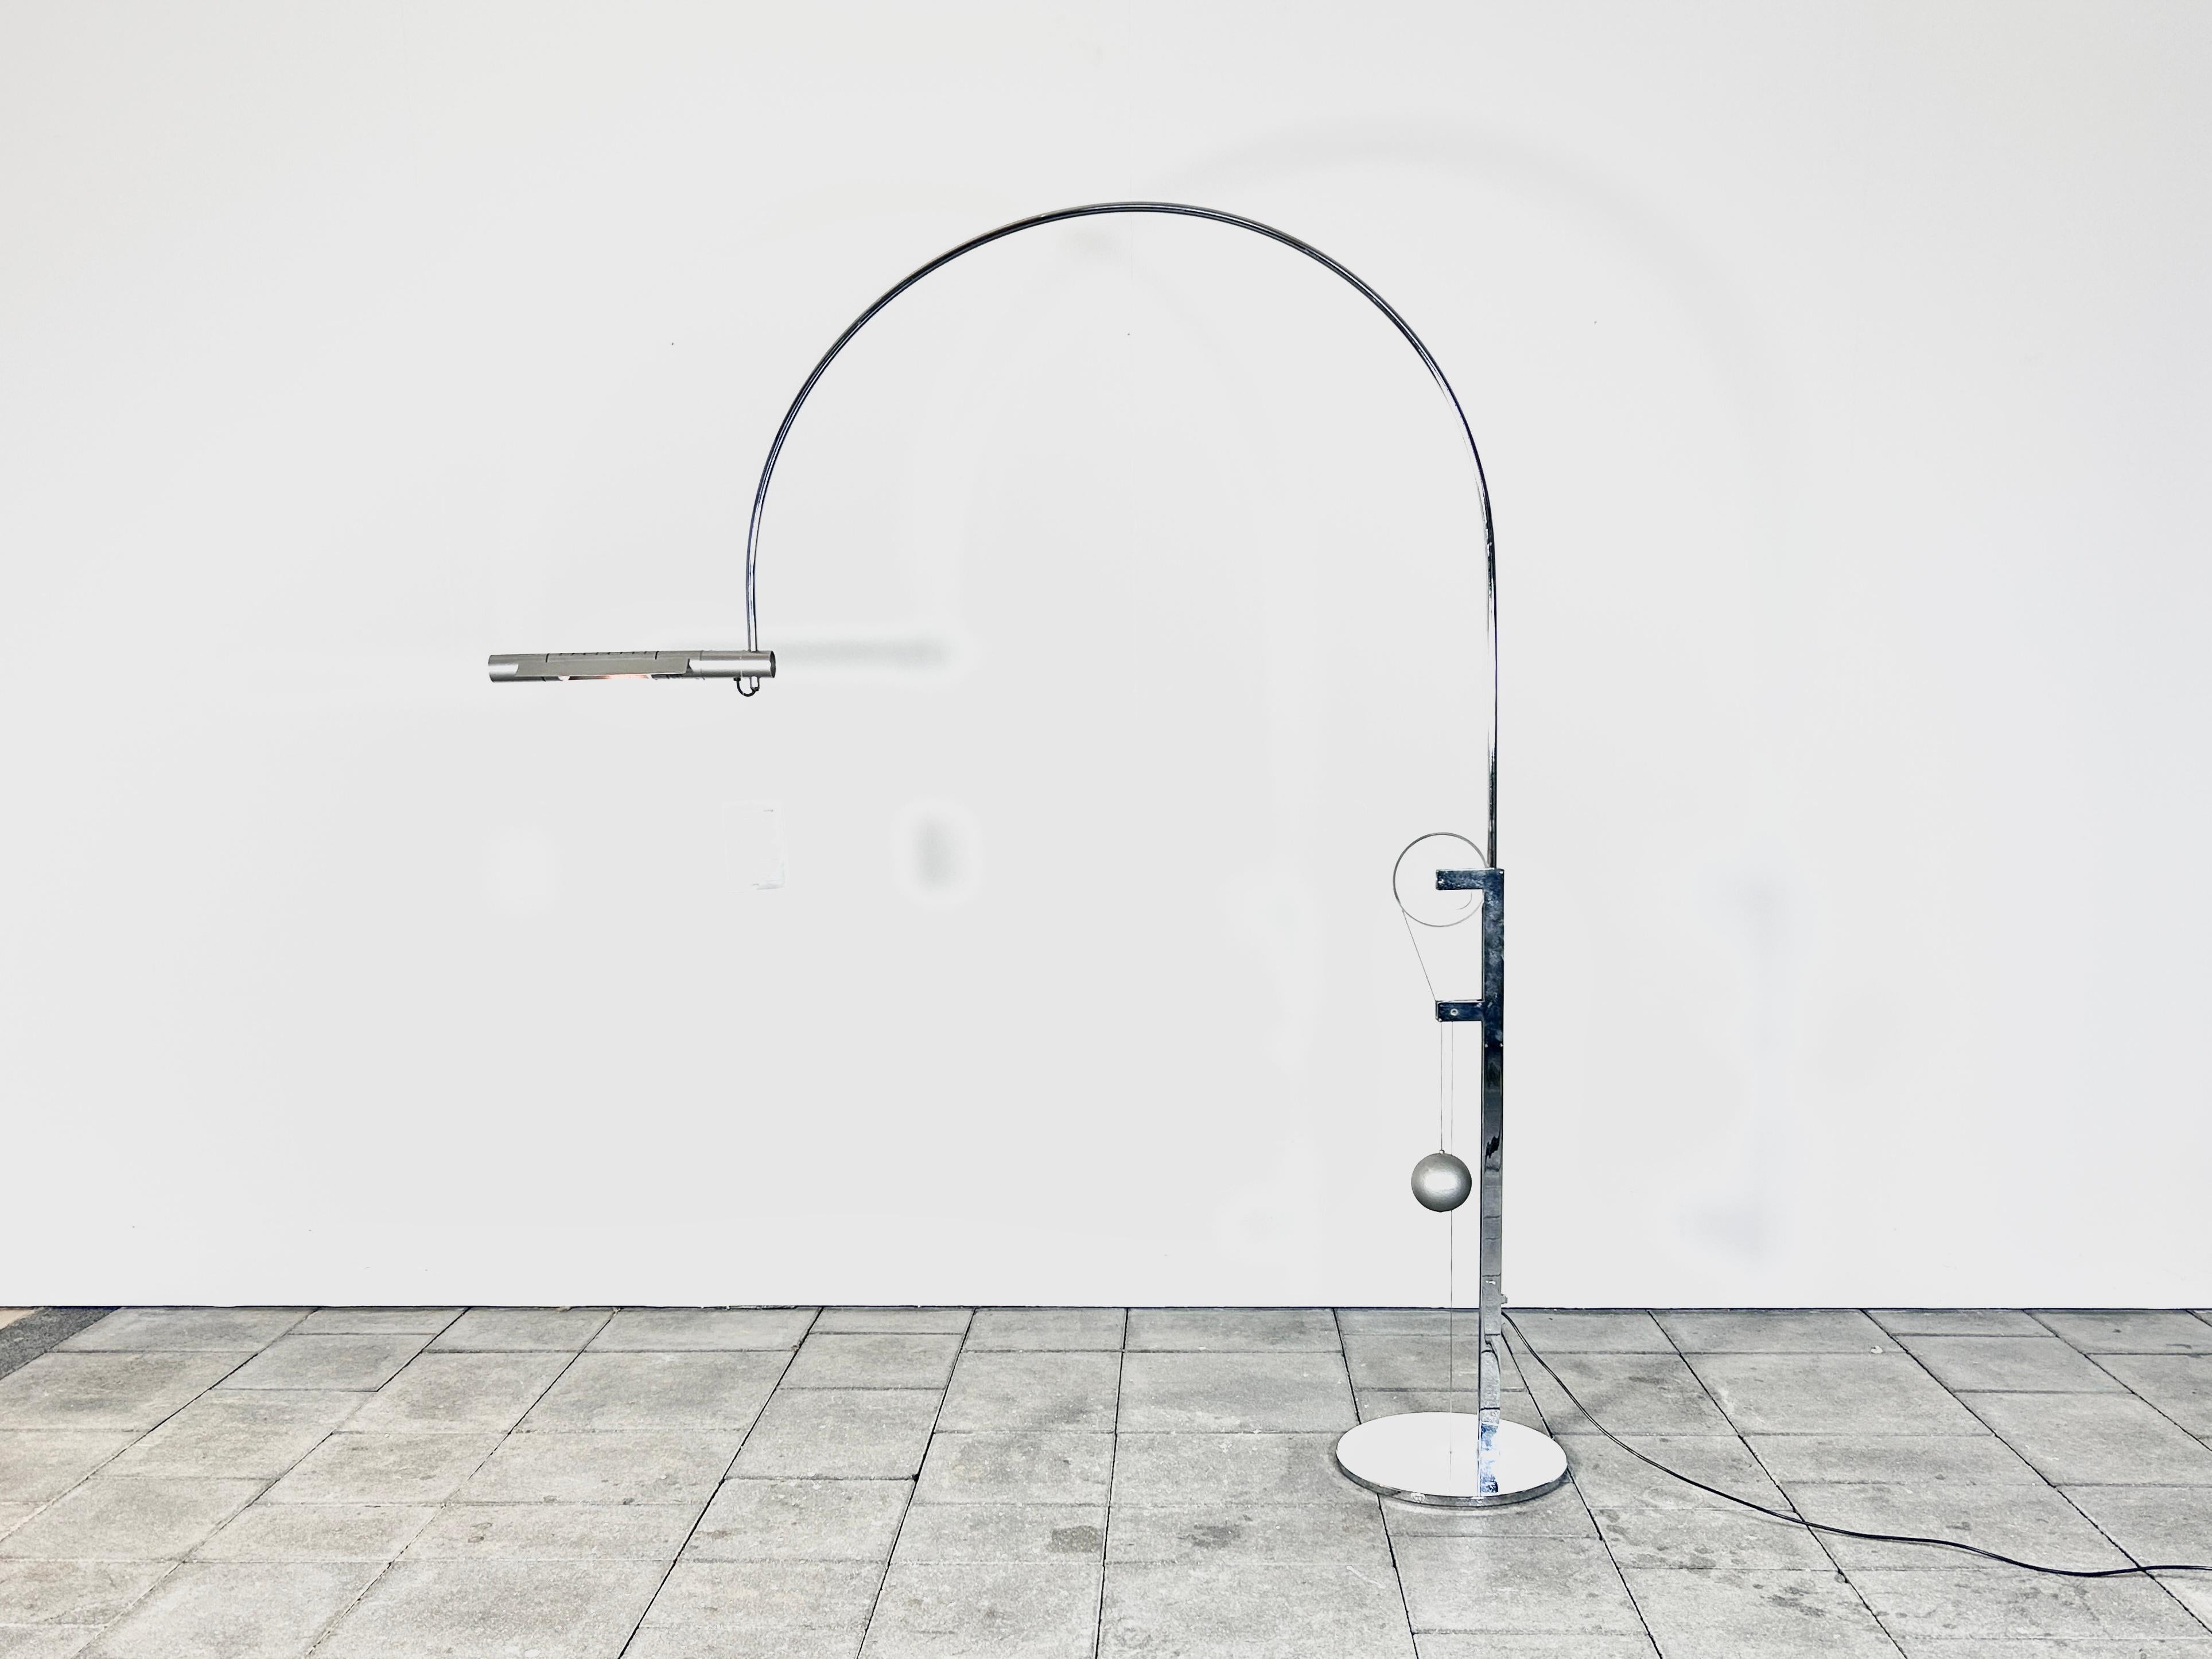 Swisslamps international Halo Mobile floor lamp

Designed by A. and R. Baltensweiler 

Manufactured ca. 1980 by Swisslamps International, Switzerland

Very elaborate construction in chrome-plated flat steel and satinated aluminum, with several